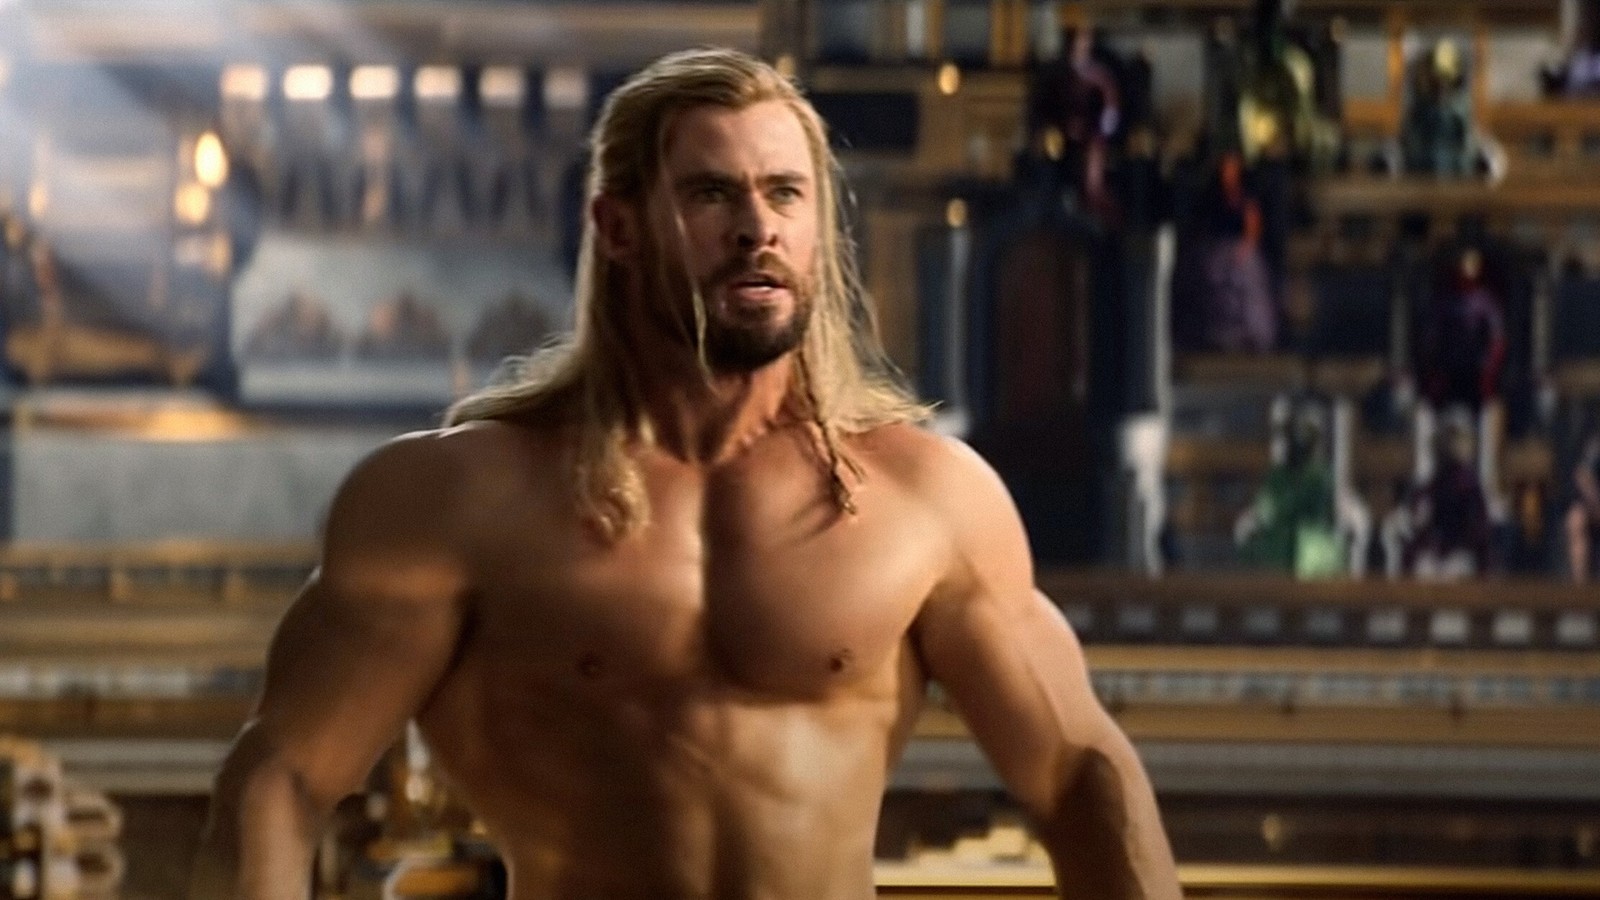 Thor: Love and Thunder reviews are here — and we have bad news